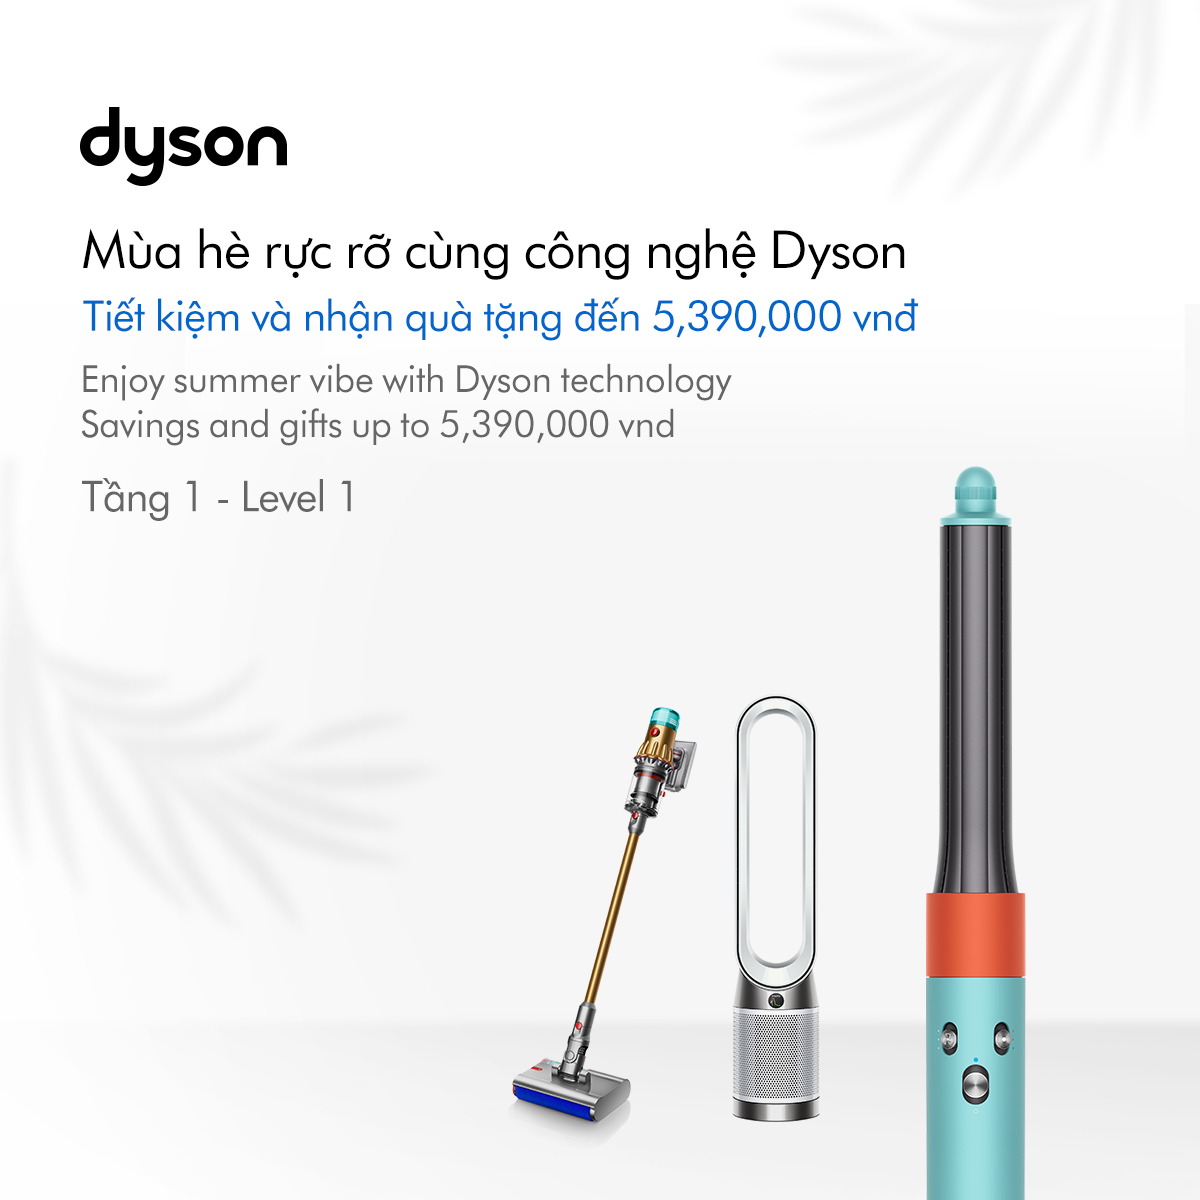 🎉 ENJOY SUMMER VIBE WITH DYSON TECHNOLOGY - SAVINGS AND GIFTS UP TO 5,390,000 VND 🎉